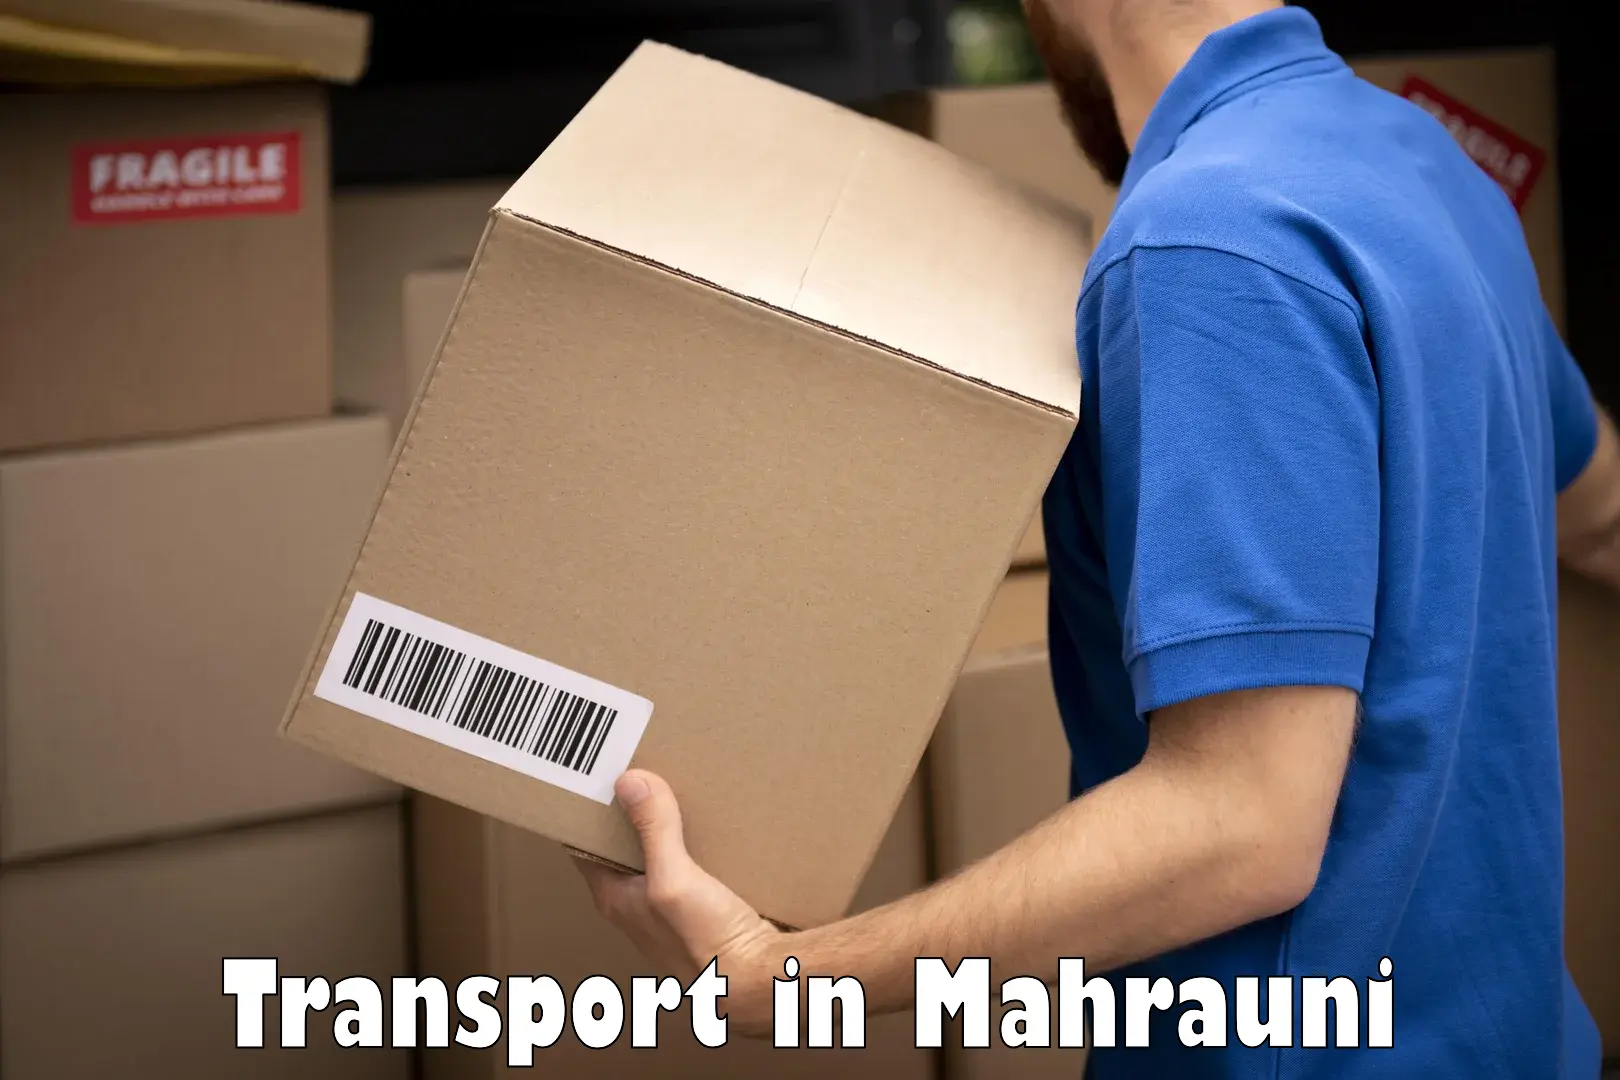 Daily parcel service transport in Mahrauni